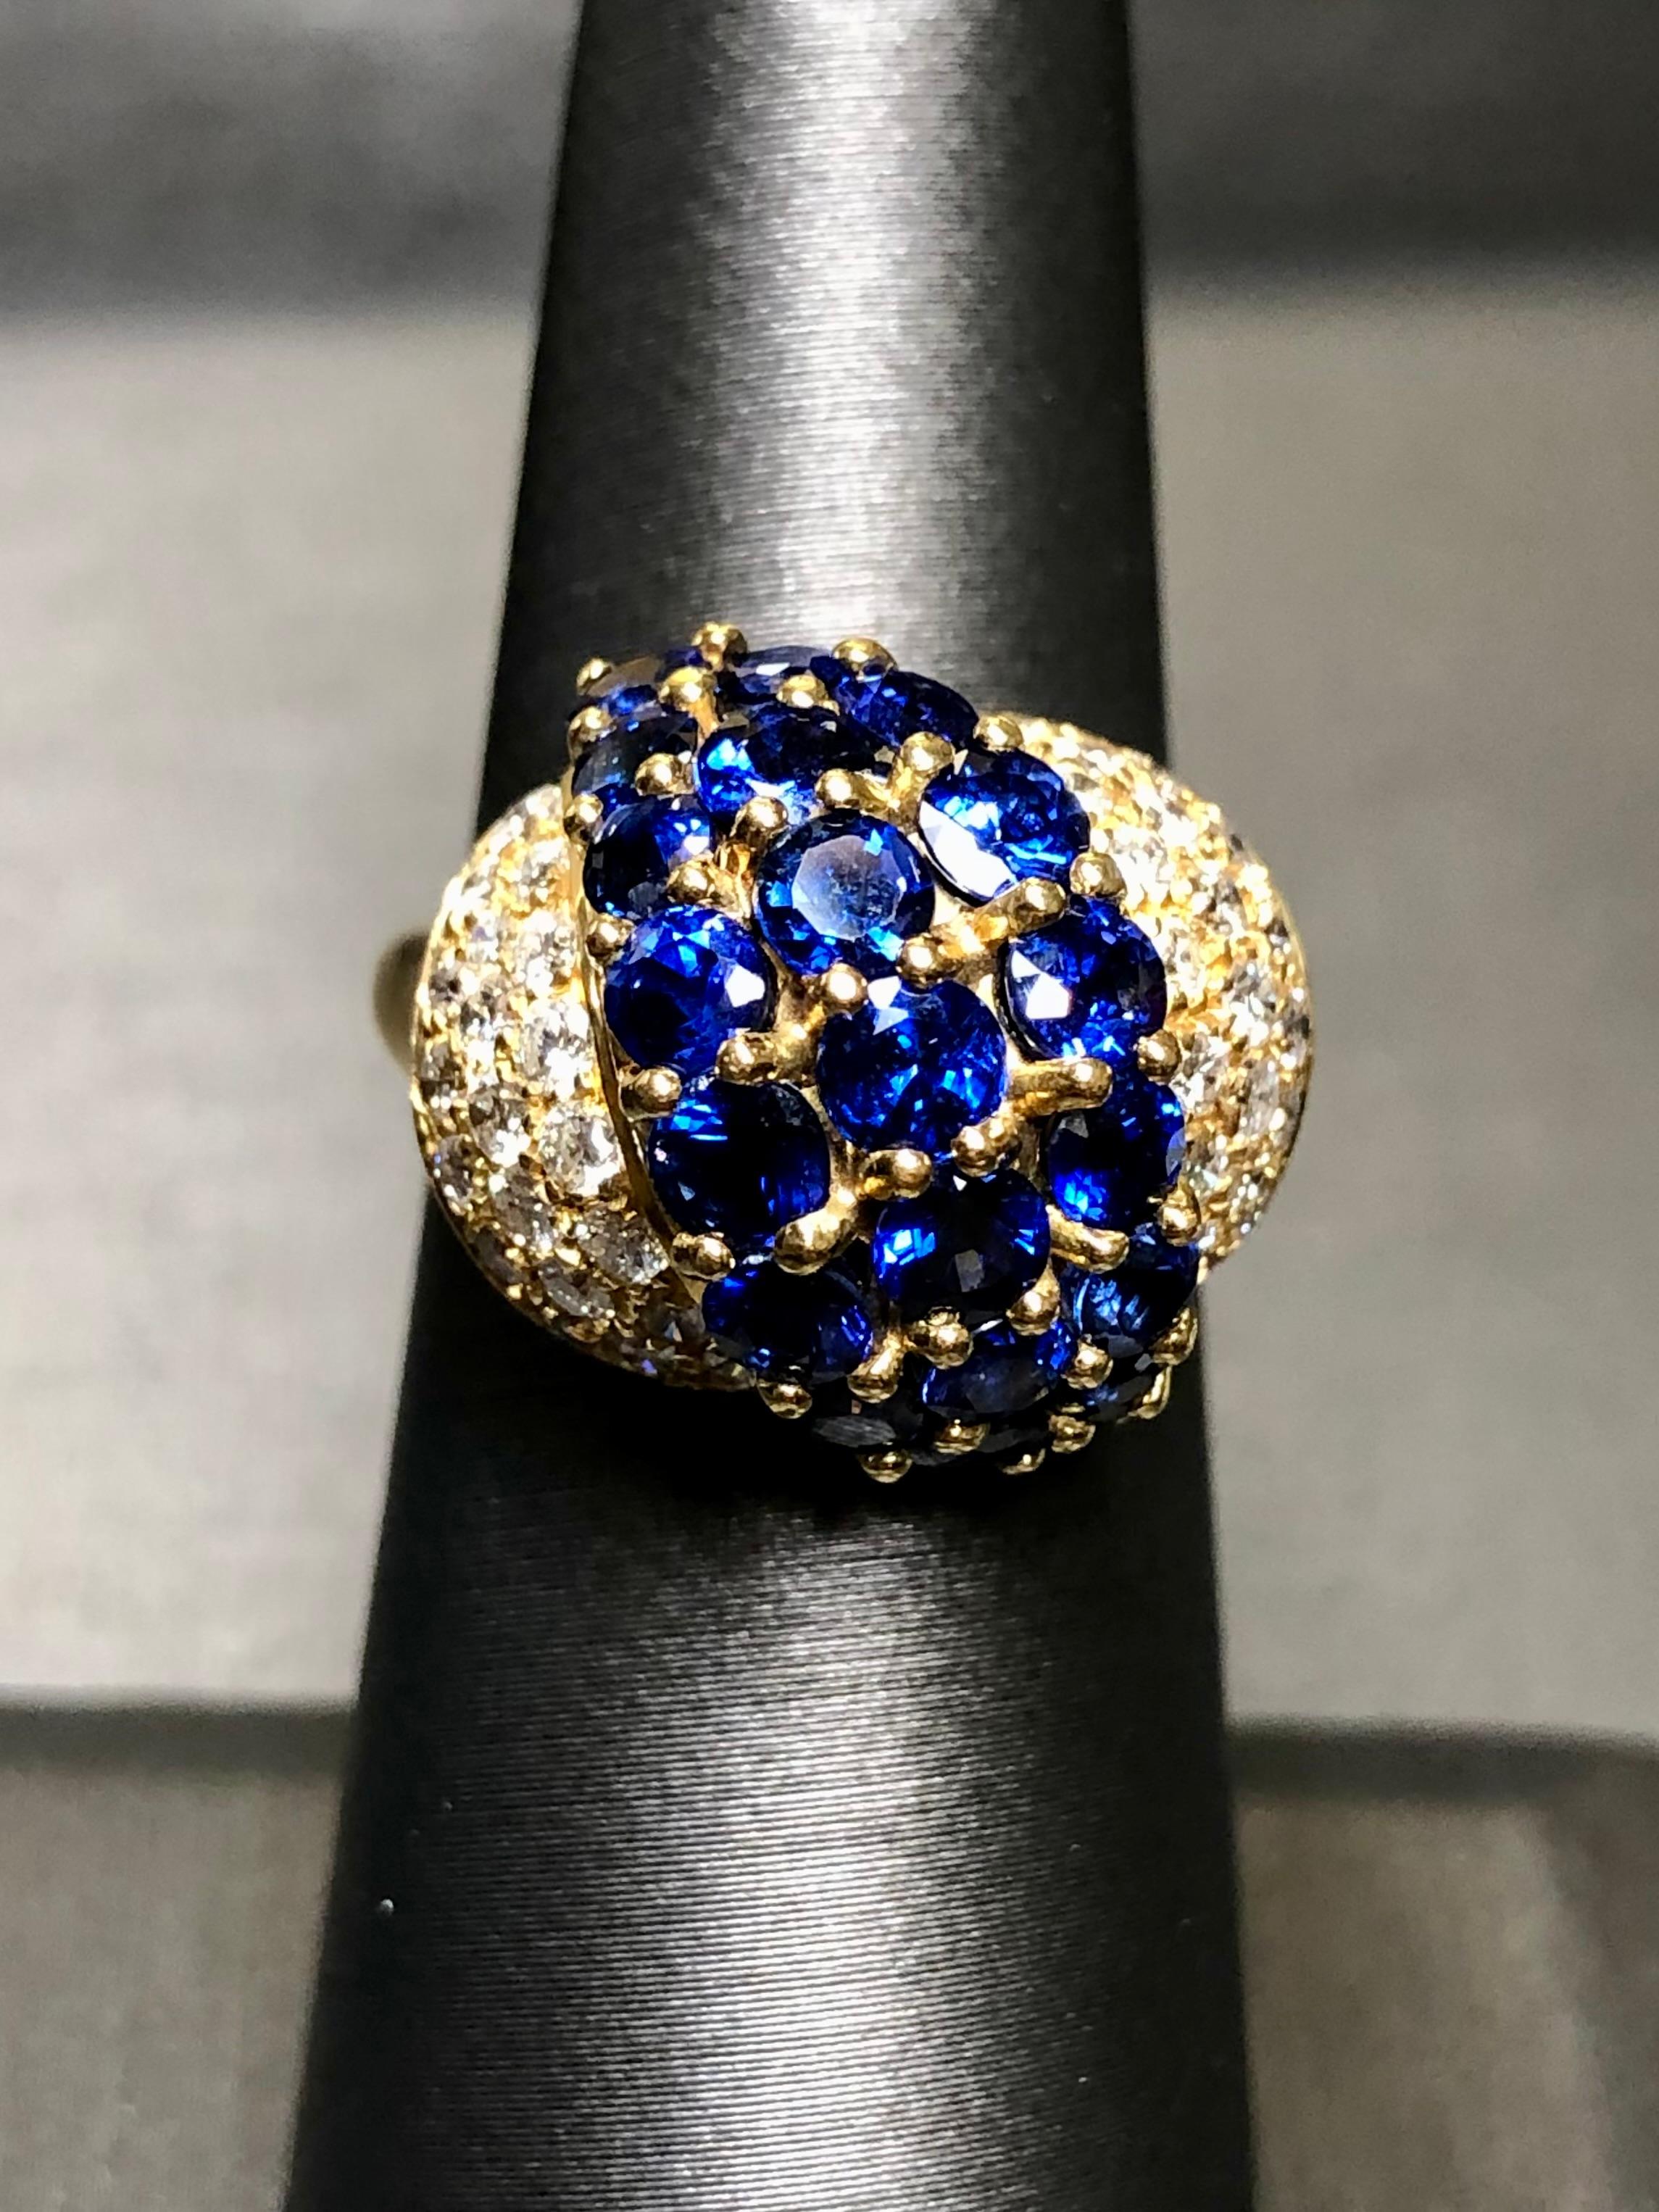 
A bright and vibrant cocktail ring done in 18K yellow gold and prong set with approximately 4cttw in gorgeously blue natural sapphires as well as 1.44cttw in F-G color Vs1-2 clarity diamonds. By Italian maker, AIMETTI.


Dimensions/Weight:

Ring